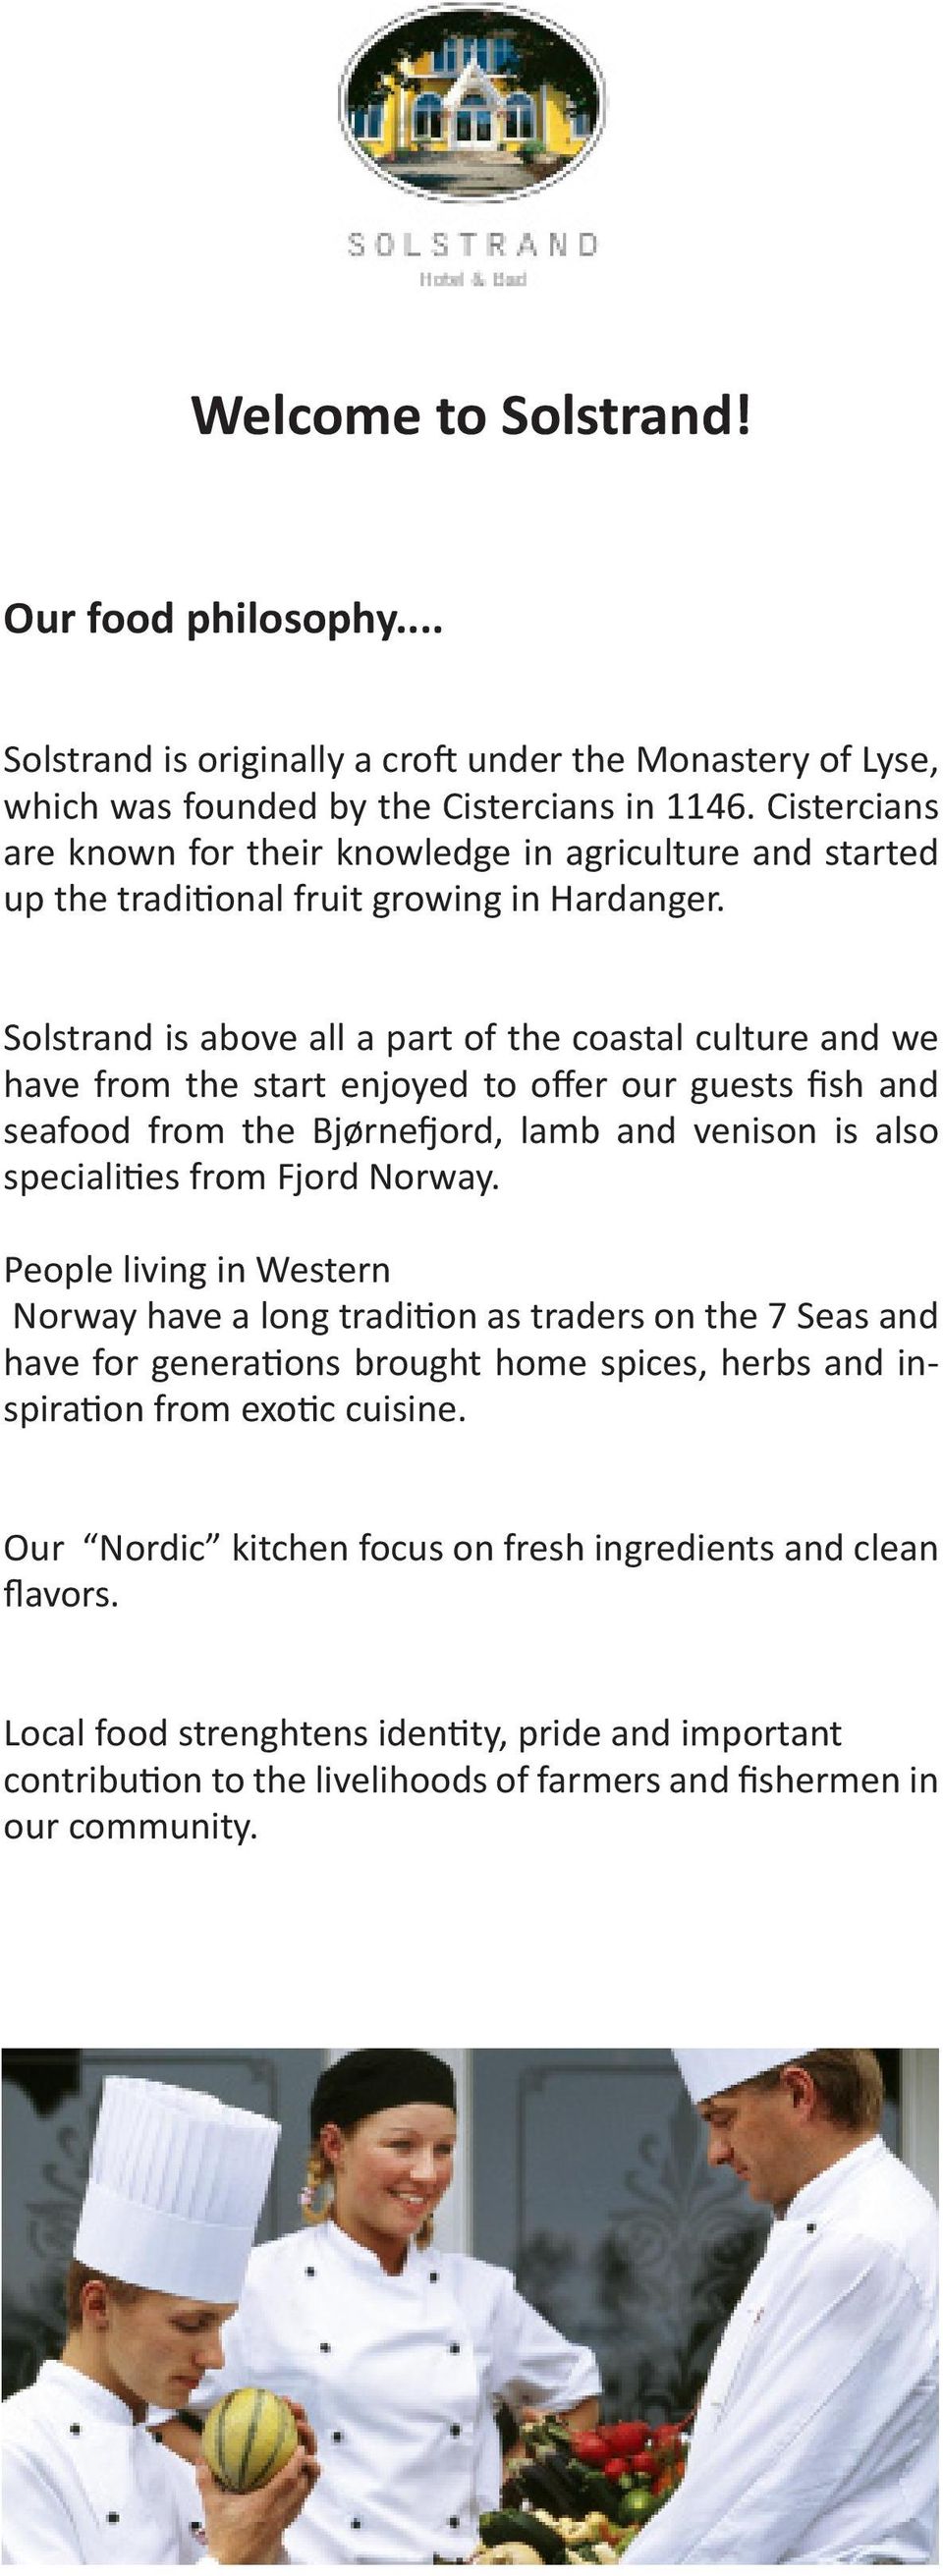 Solstrand is above all a part of the coastal culture and we have from the start enjoyed to offer our guests fish and seafood from the Bjørnefjord, lamb and venison is also specialities from Fjord